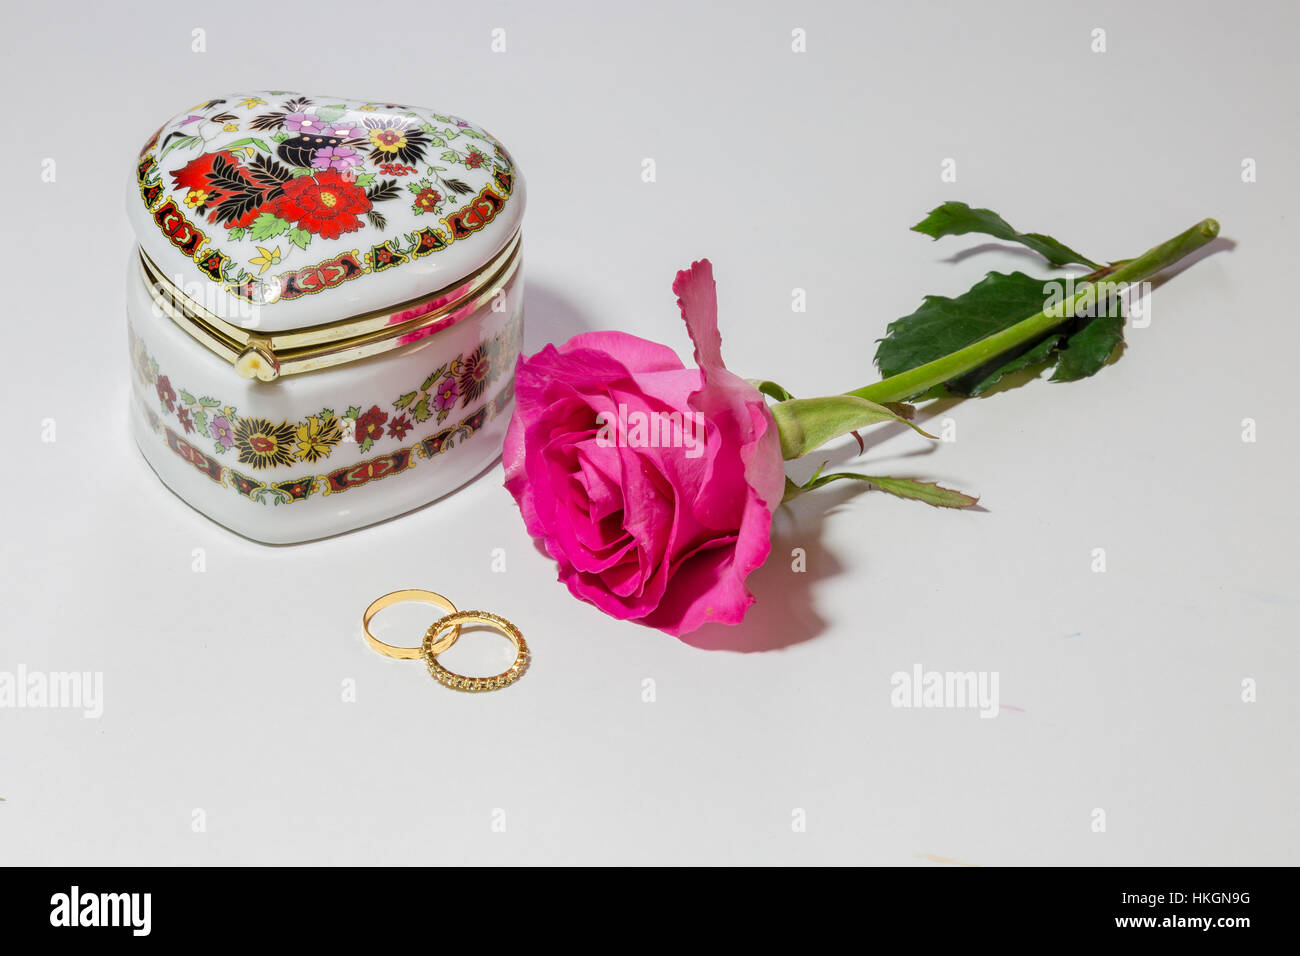 Romantic Valentines day content with decorated jewel case with a pink rose and gold engagement rings in white background. Stock Photo